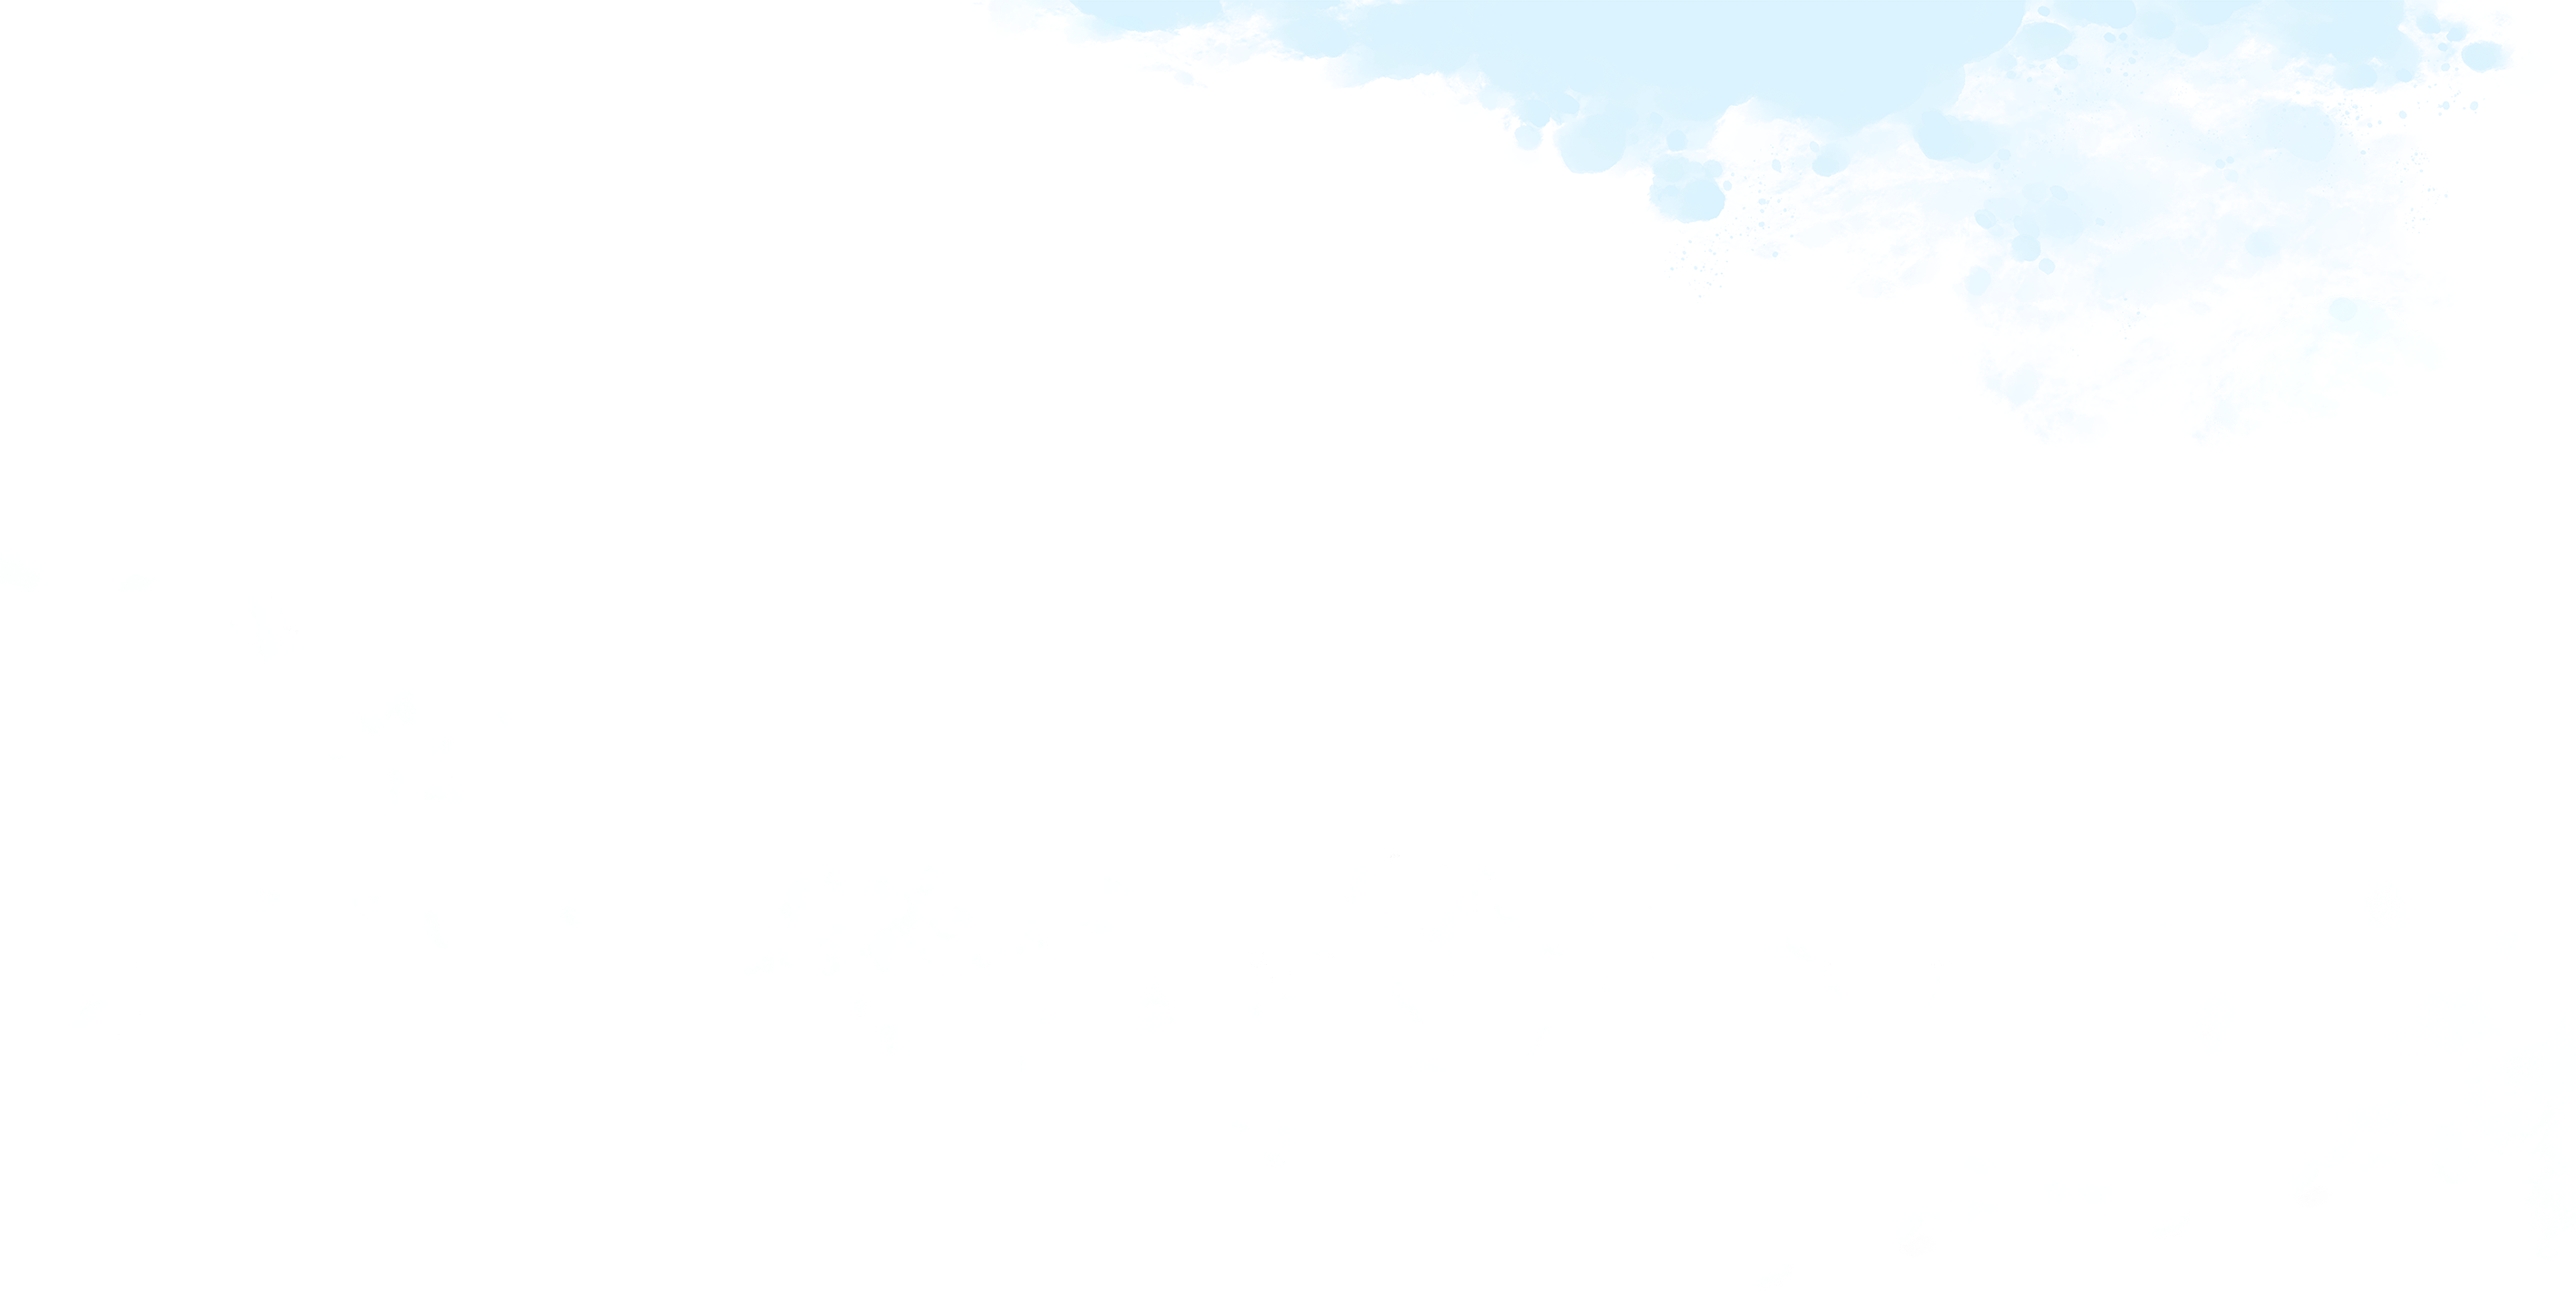 Background image displaying clouds